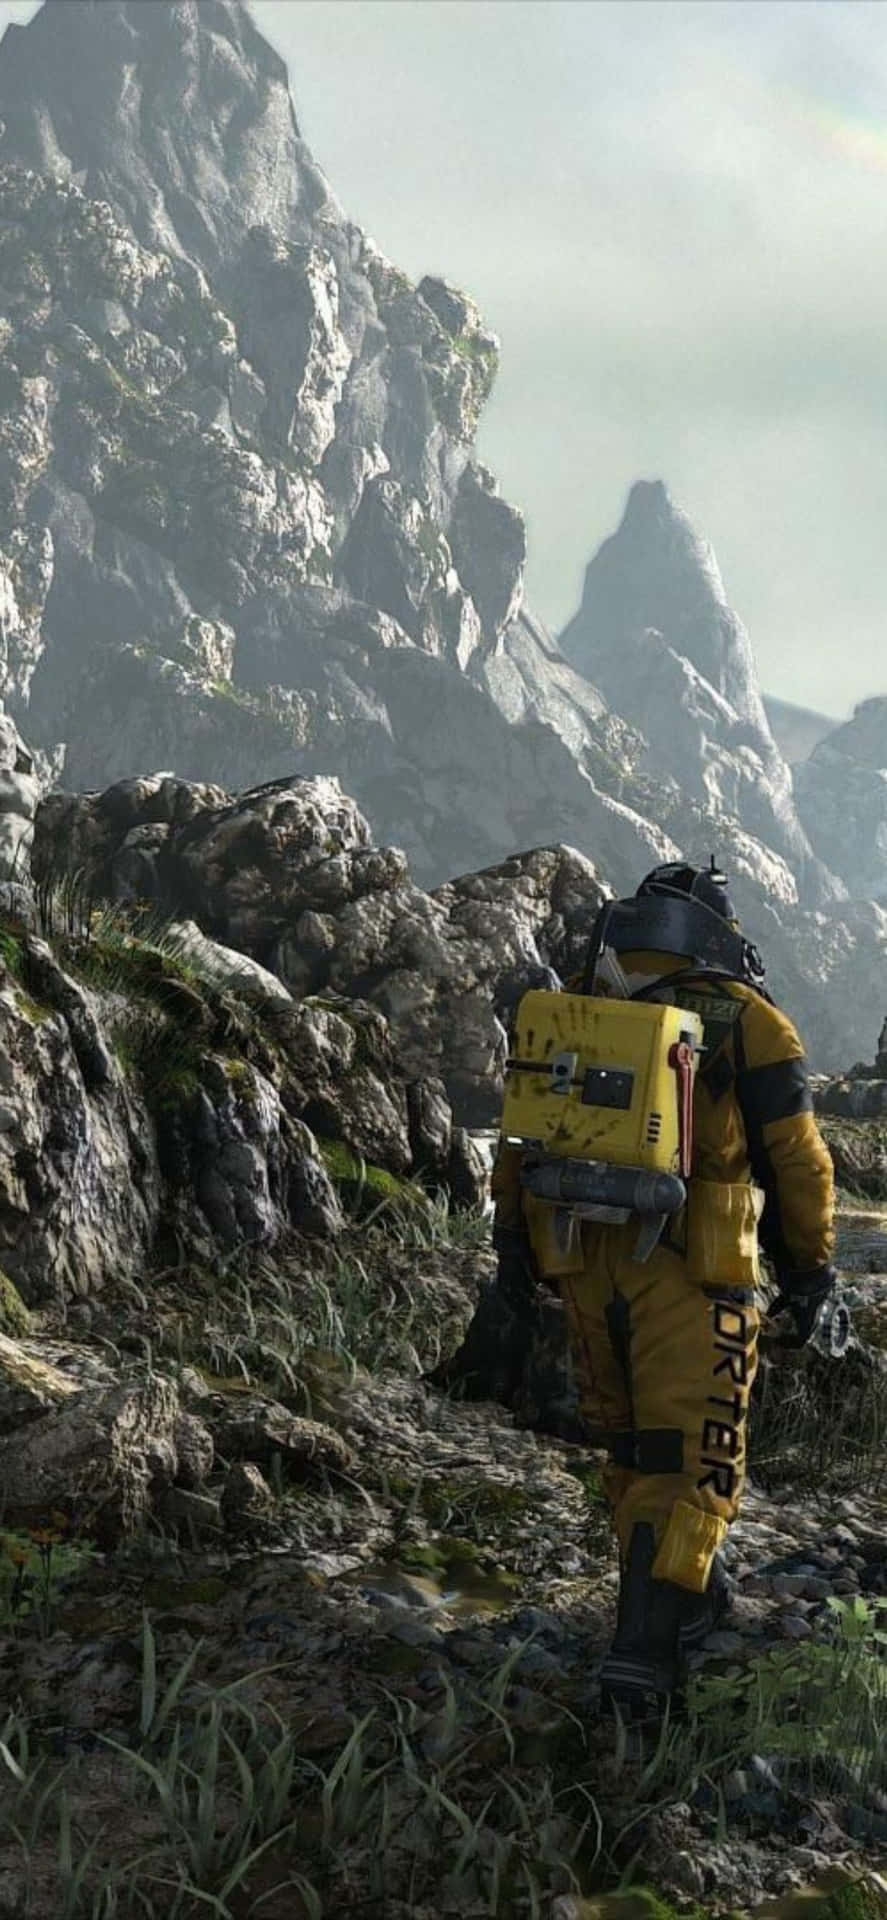 Unearthly power lives in the iPhone Xs Max featuring Death Stranding